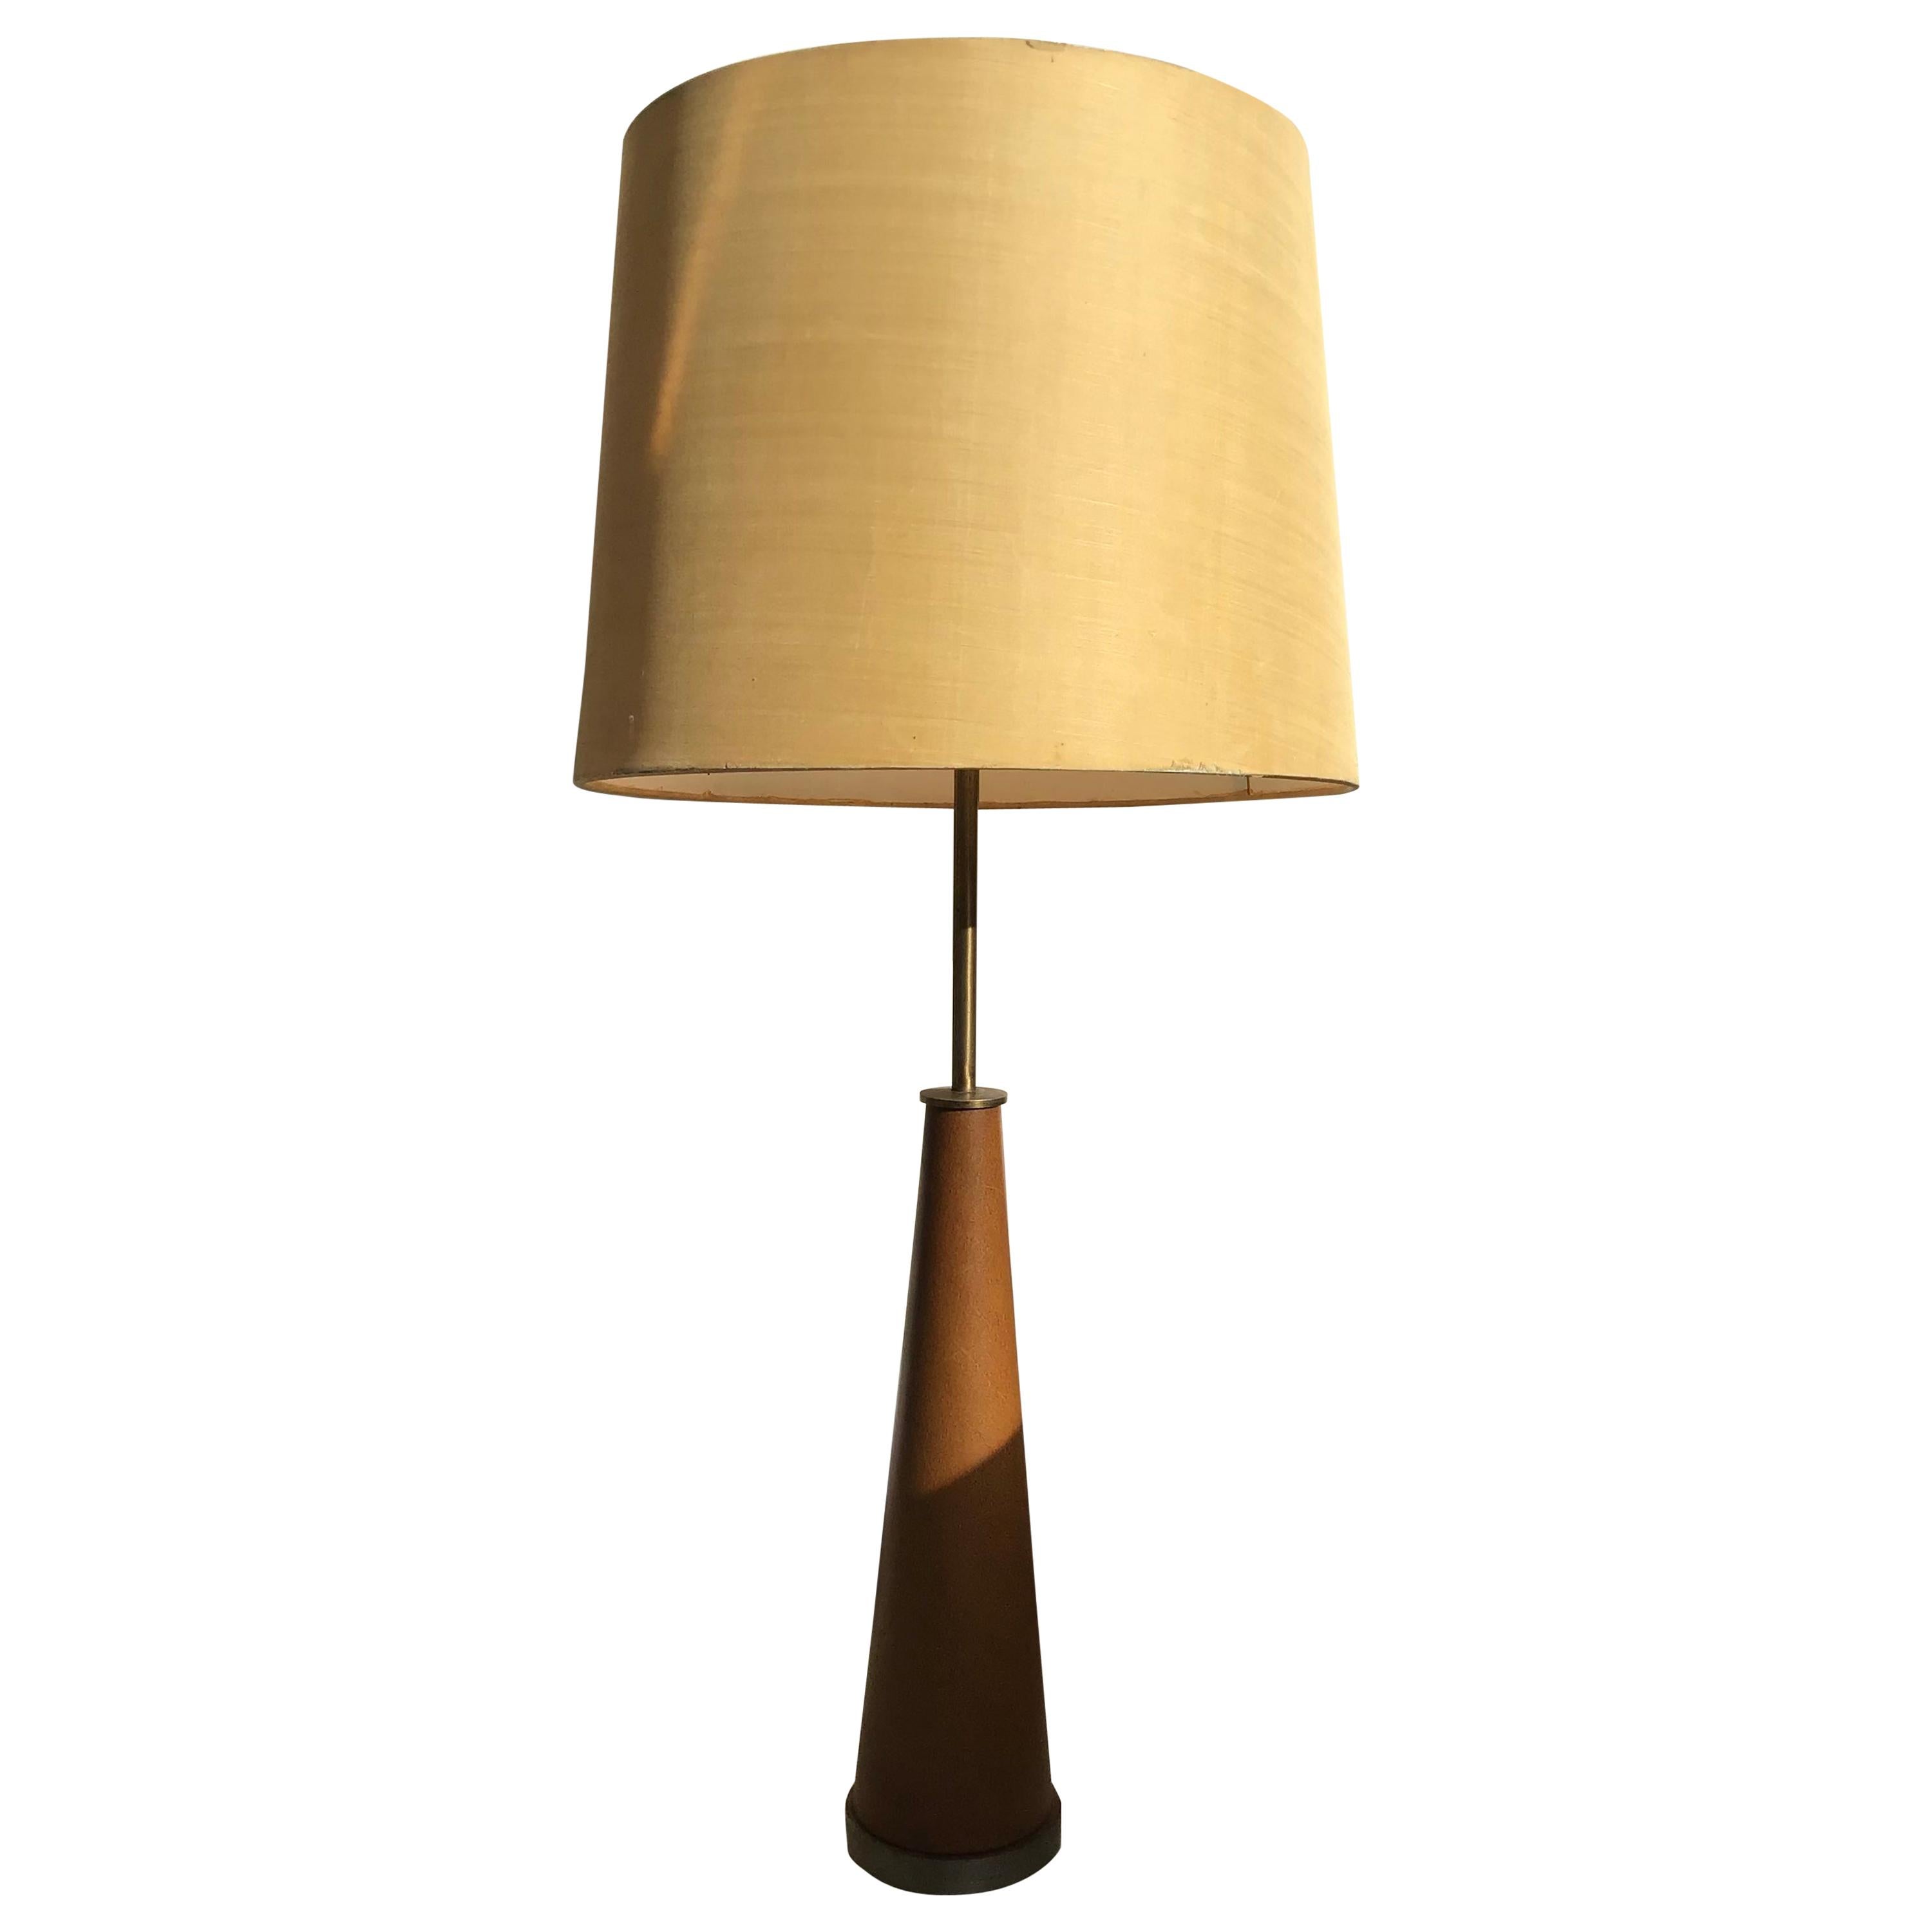 Stilnovo Style Table Lamp Metal Crome Skin Fabric Lampshade, 1950, Italy For Sale